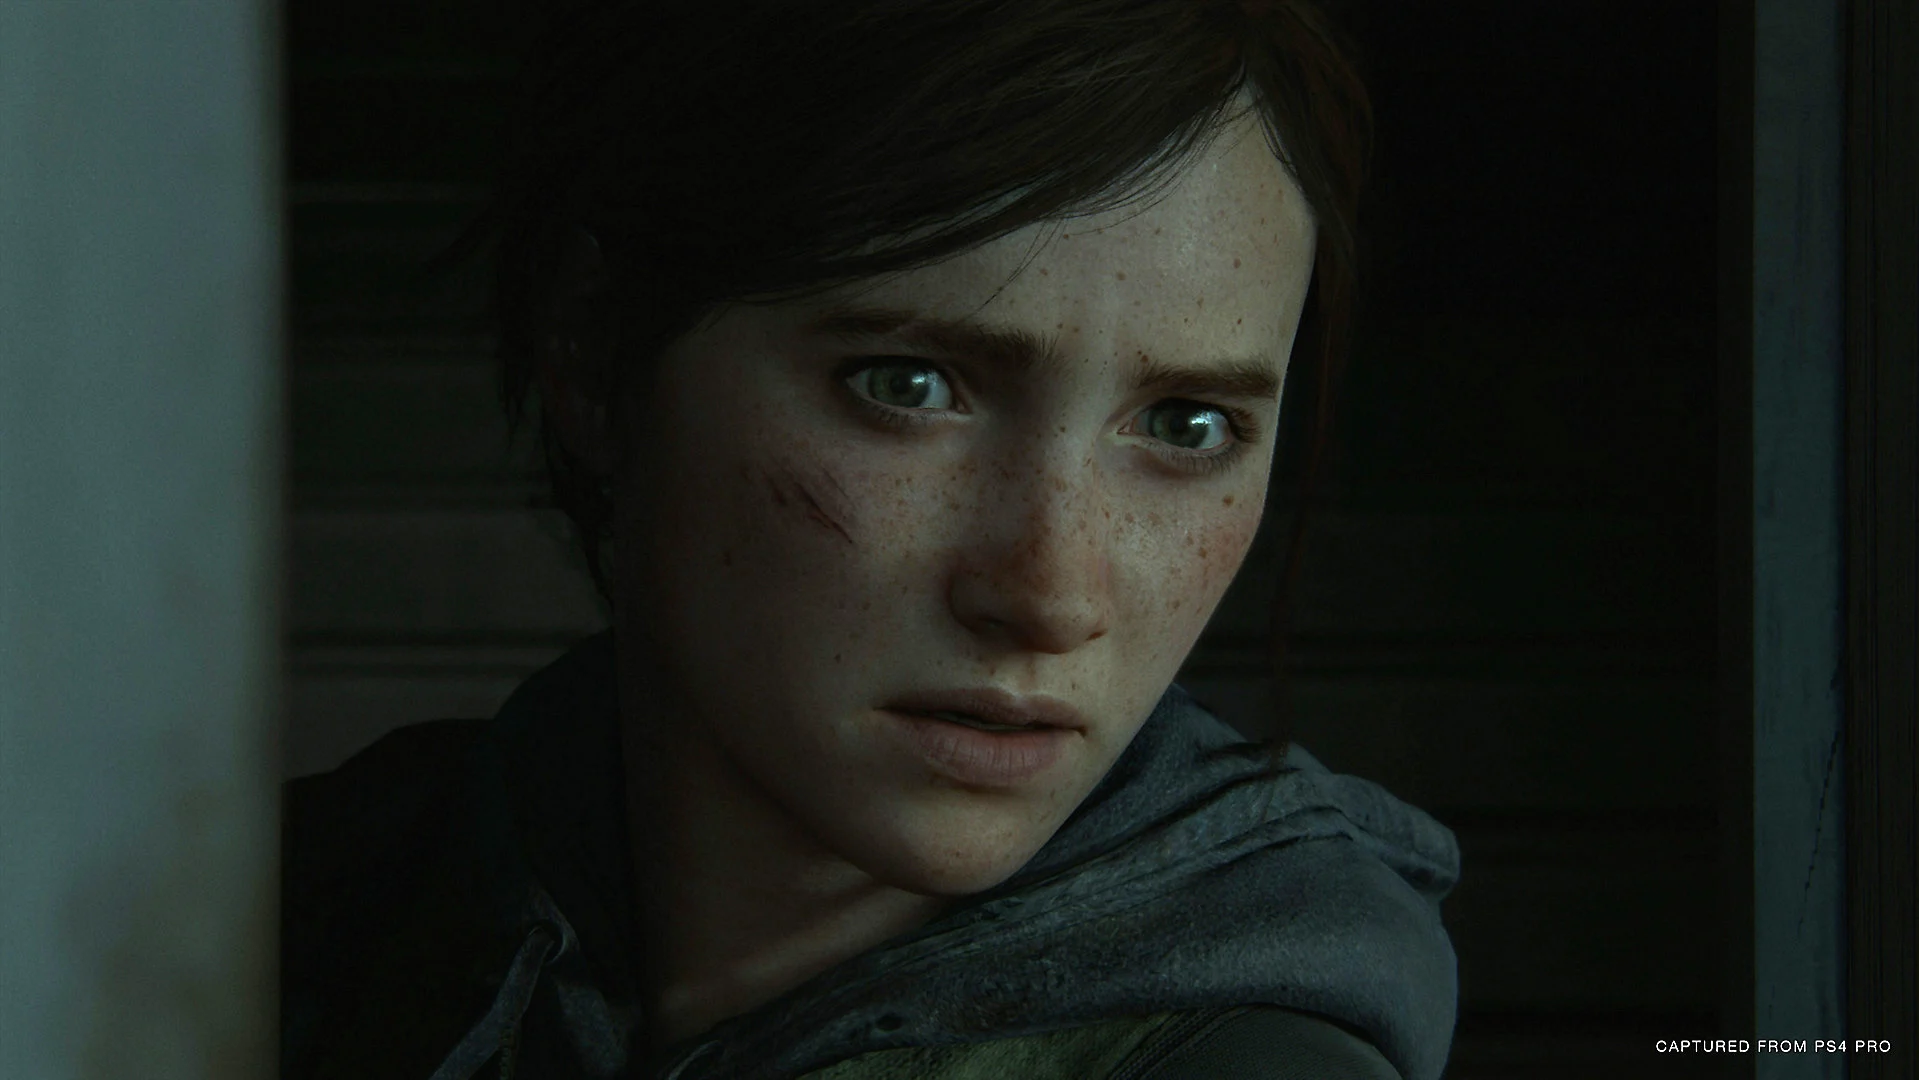 The Last of Us Part 2 has gone gold